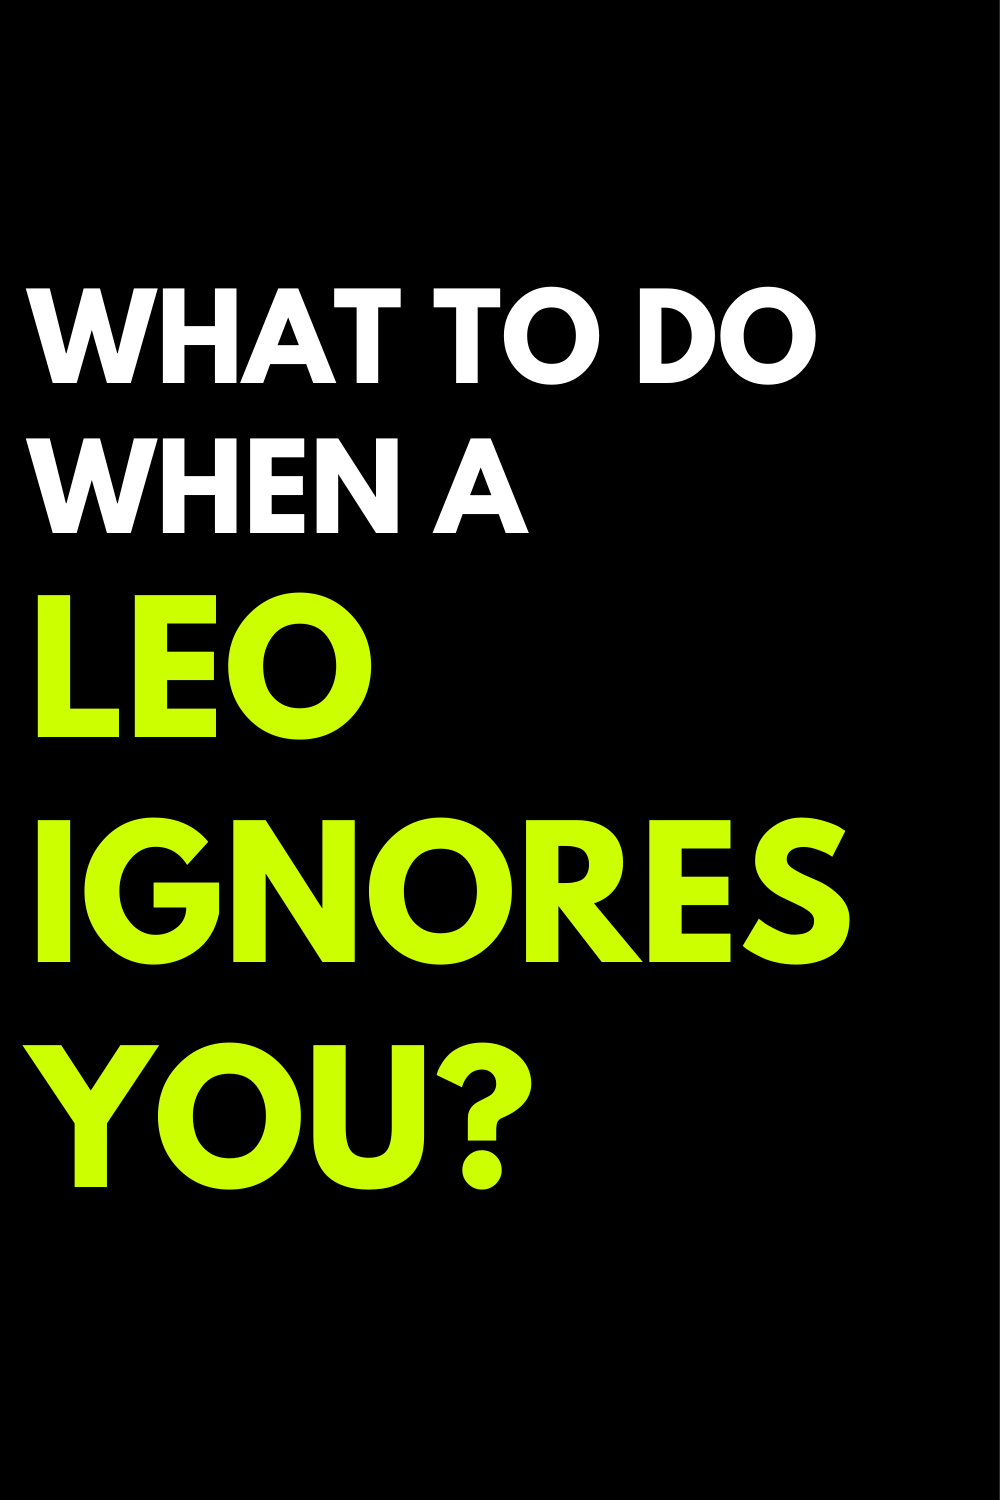 What to do when a Leo ignores you?